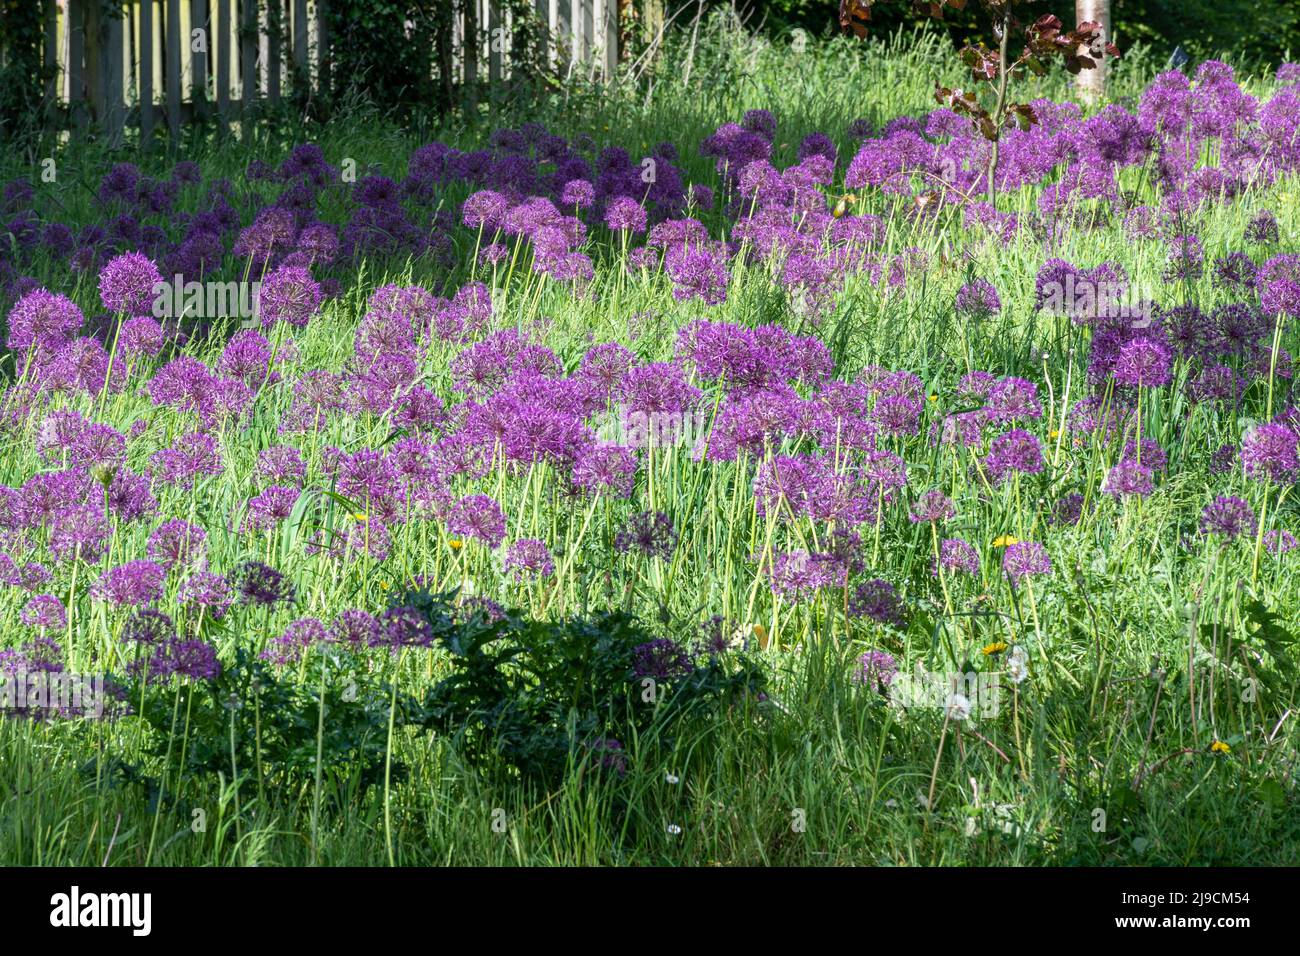 The Allium Meadow at RHS Wisley Garden during May with purple alliums in flower, Surrey, England, UK Stock Photo